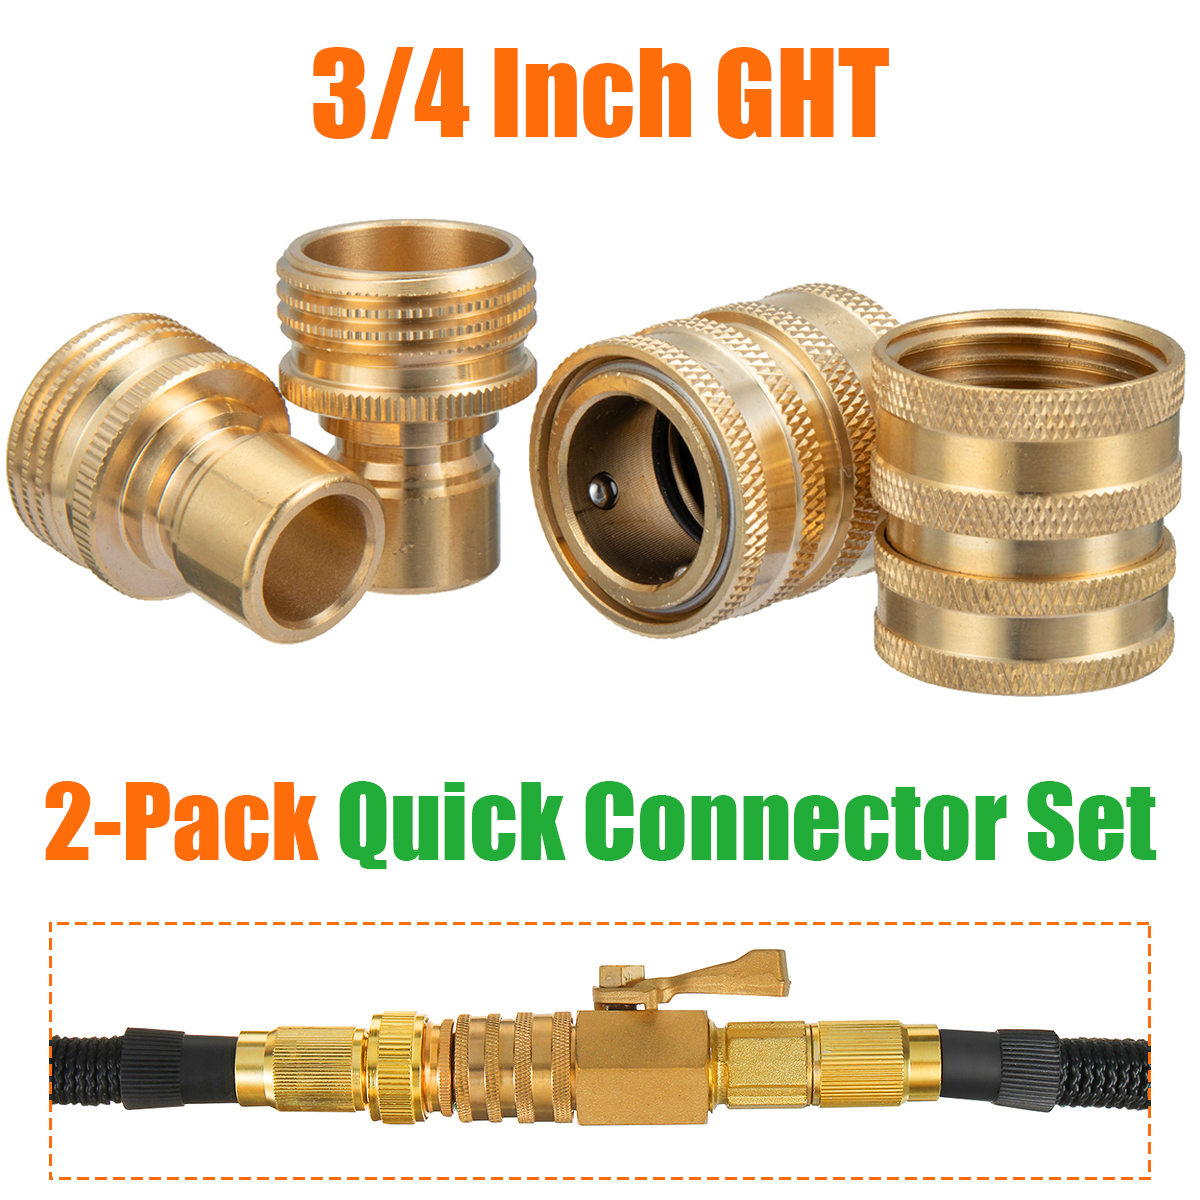 Garden-Hose-34in-GHT-Cokden-Solid-Brass-Quick-Connect-Kit-Watering-Outdoor-Home-1949837-2